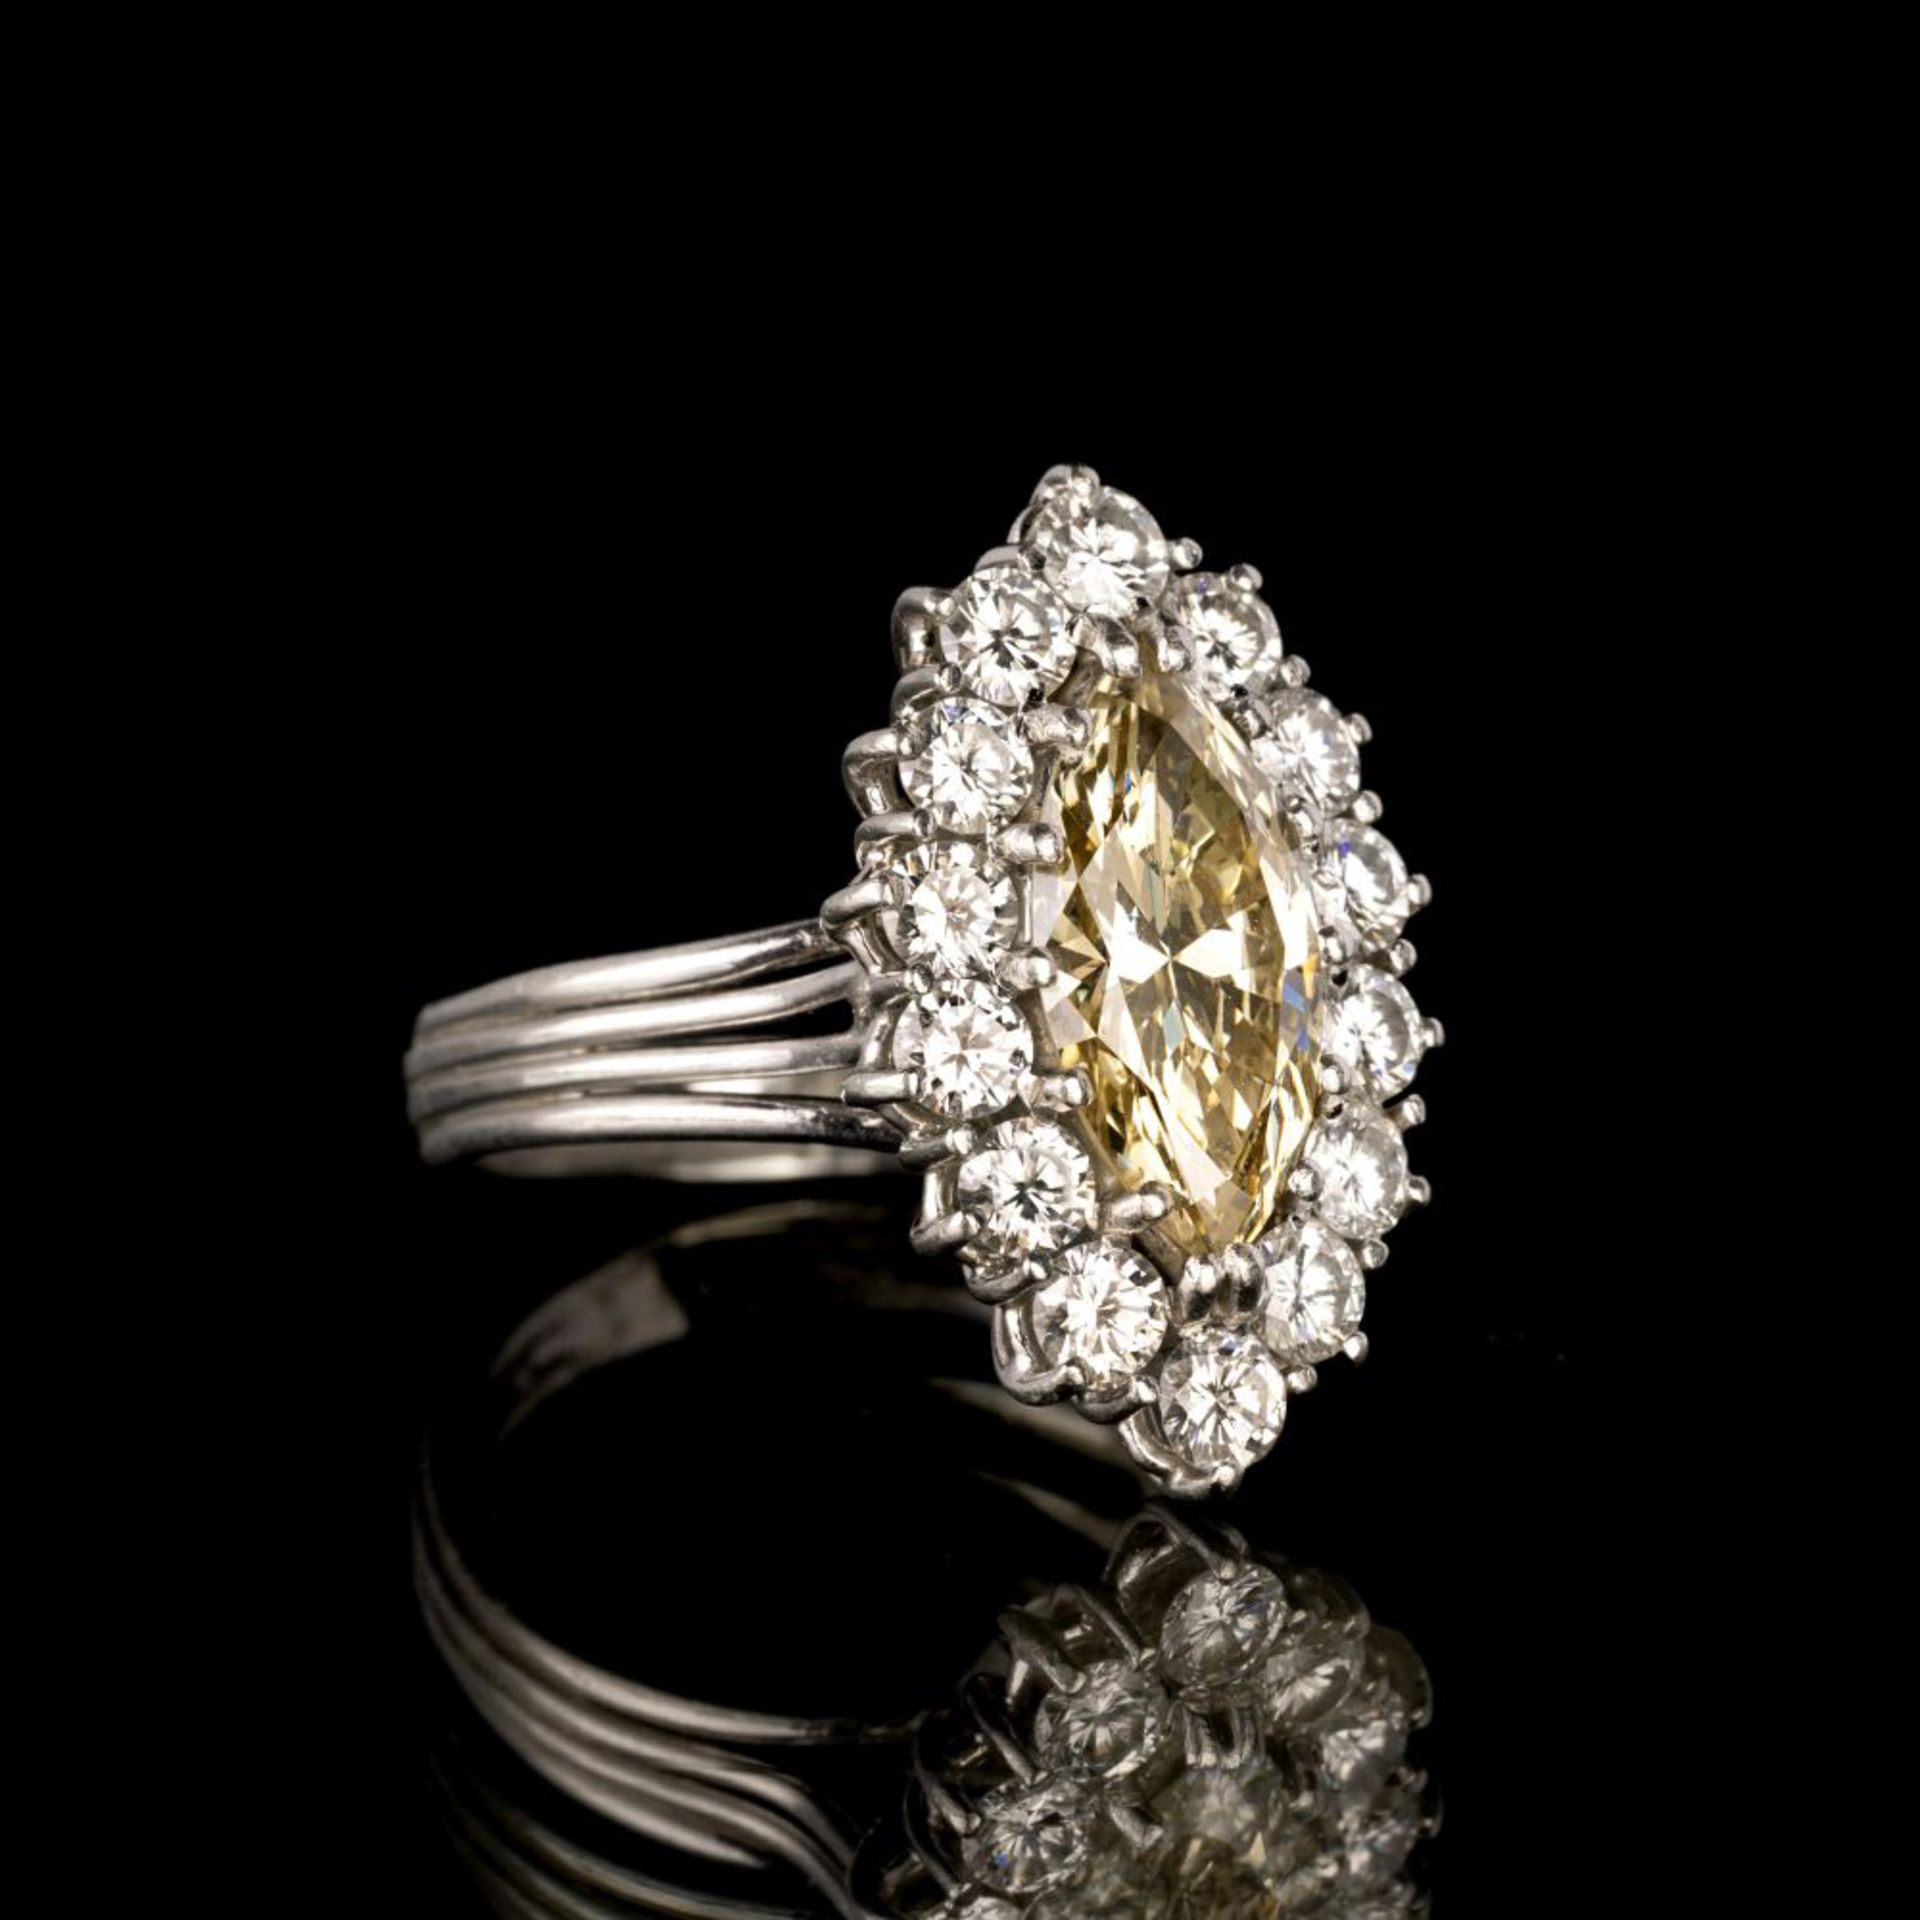 A Fancy Diamond Ring. - Image 2 of 2